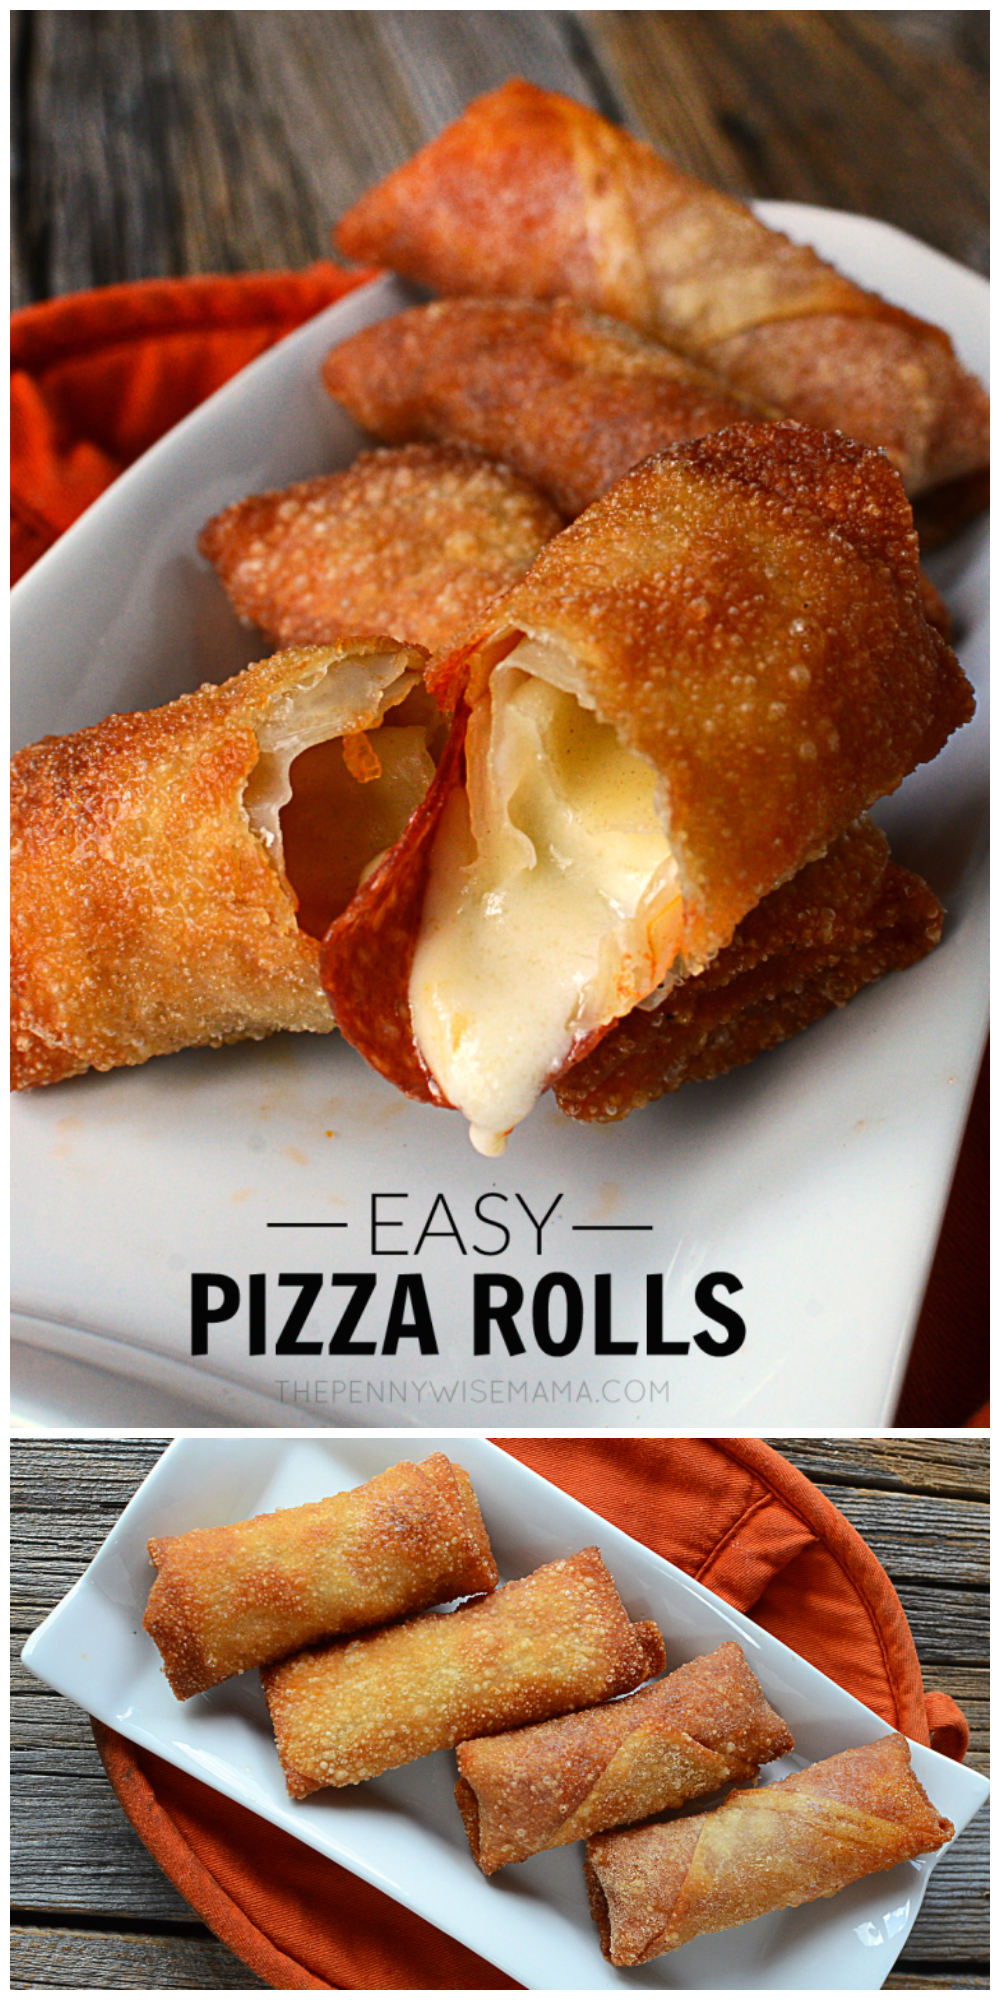 Homemade Pizza Rolls using egg roll wrappers - simple & delicious appetizer for game day, holidays and parties!